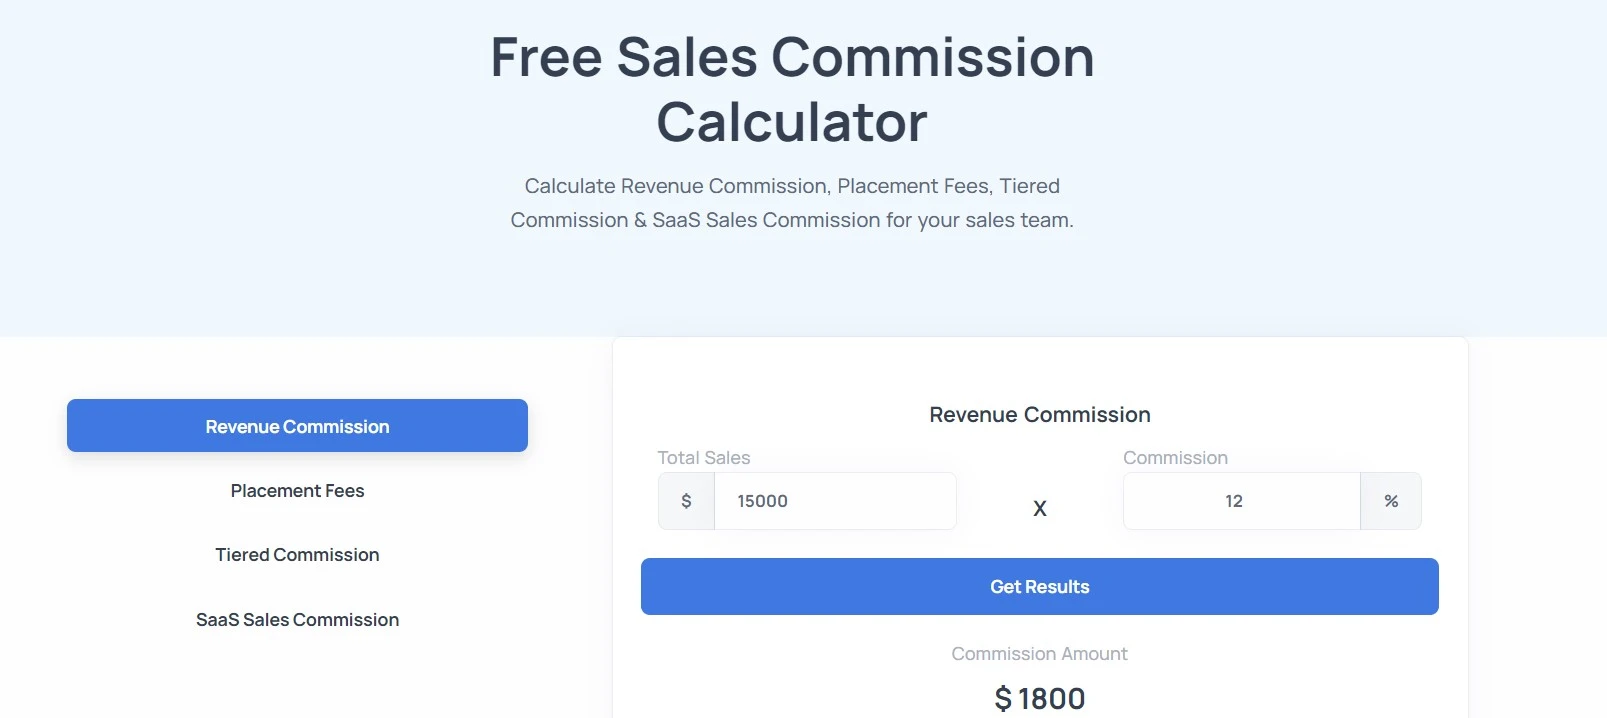 Free Sales Commission Calculator